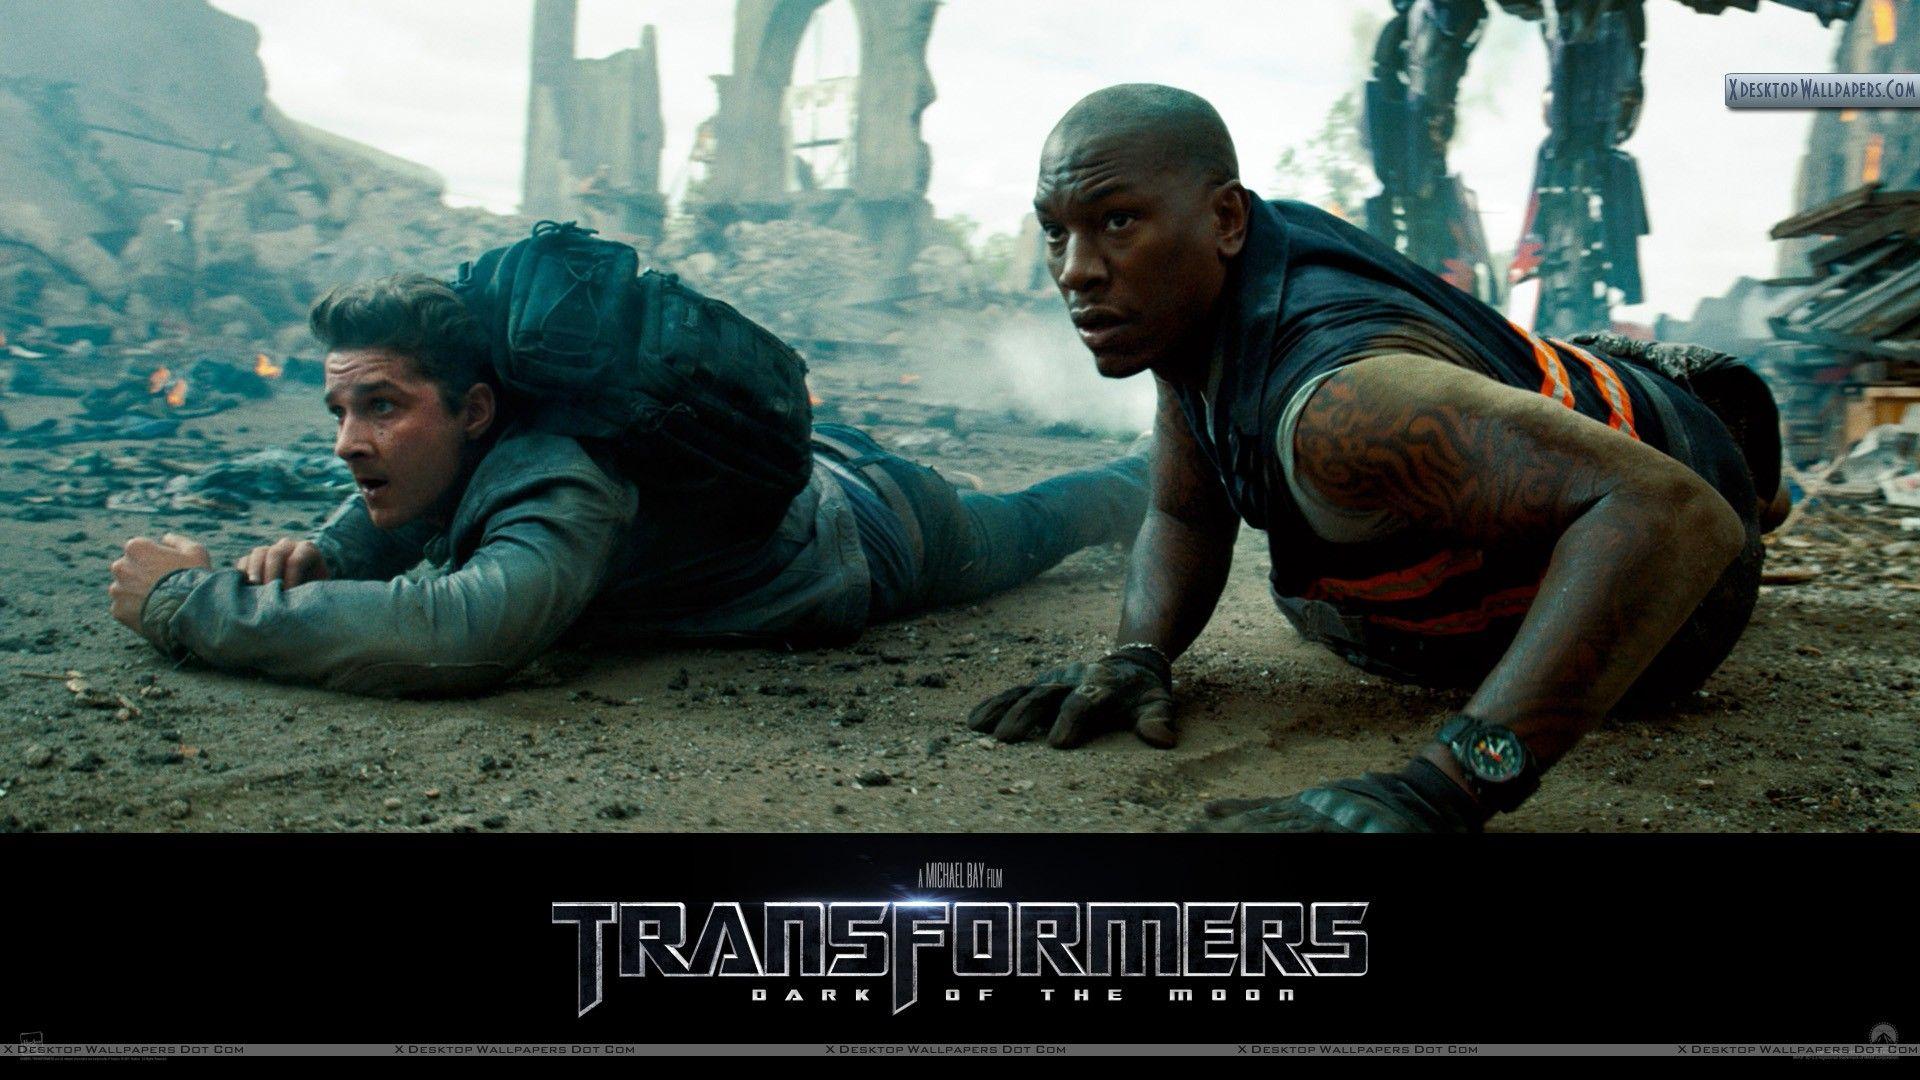 Shia LaBeouf and Tyrese Gibson in Transformers